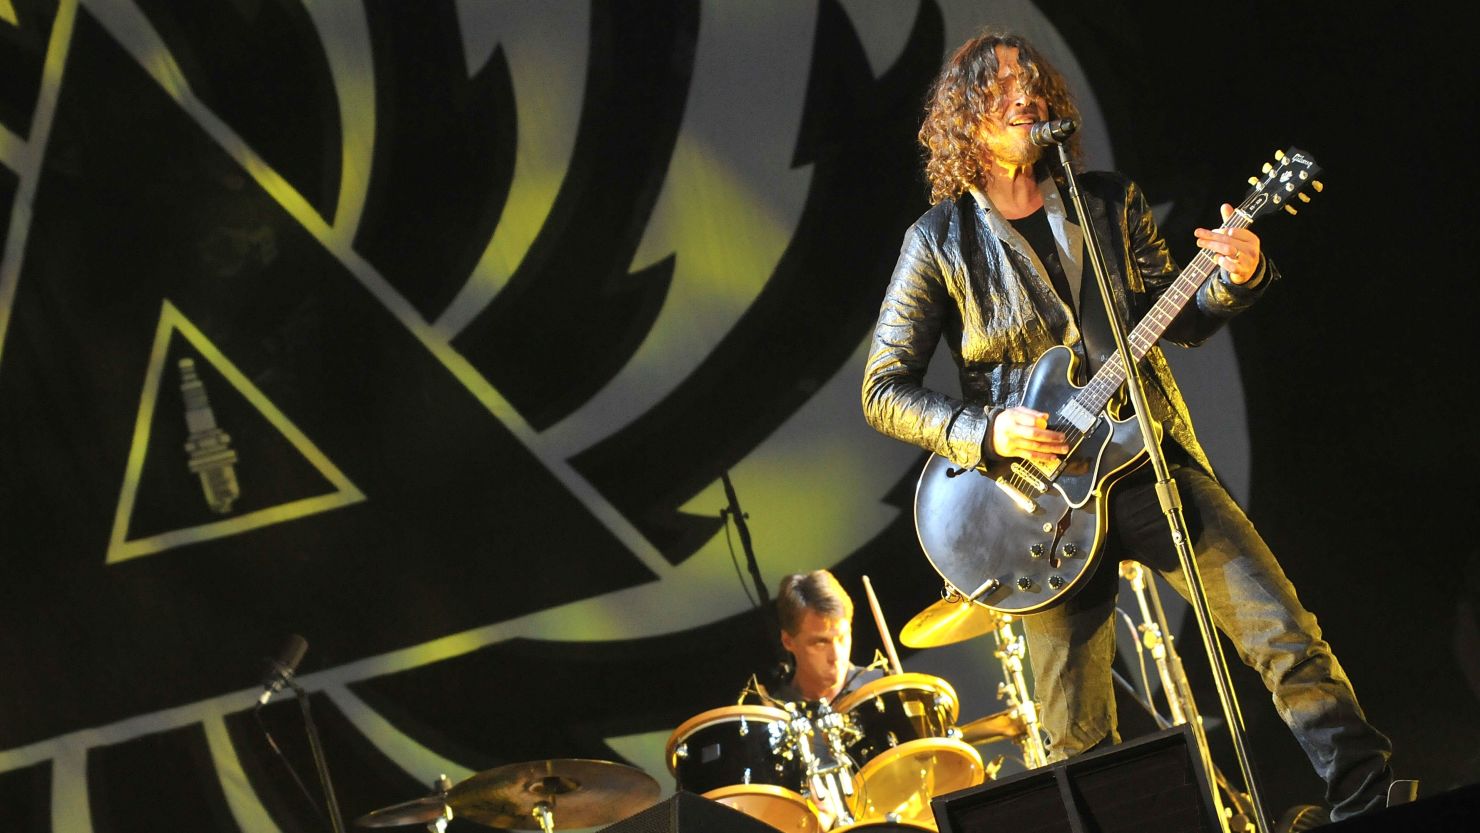 Chris Cornell and Soundgarden are back with a new album, "King Animal."